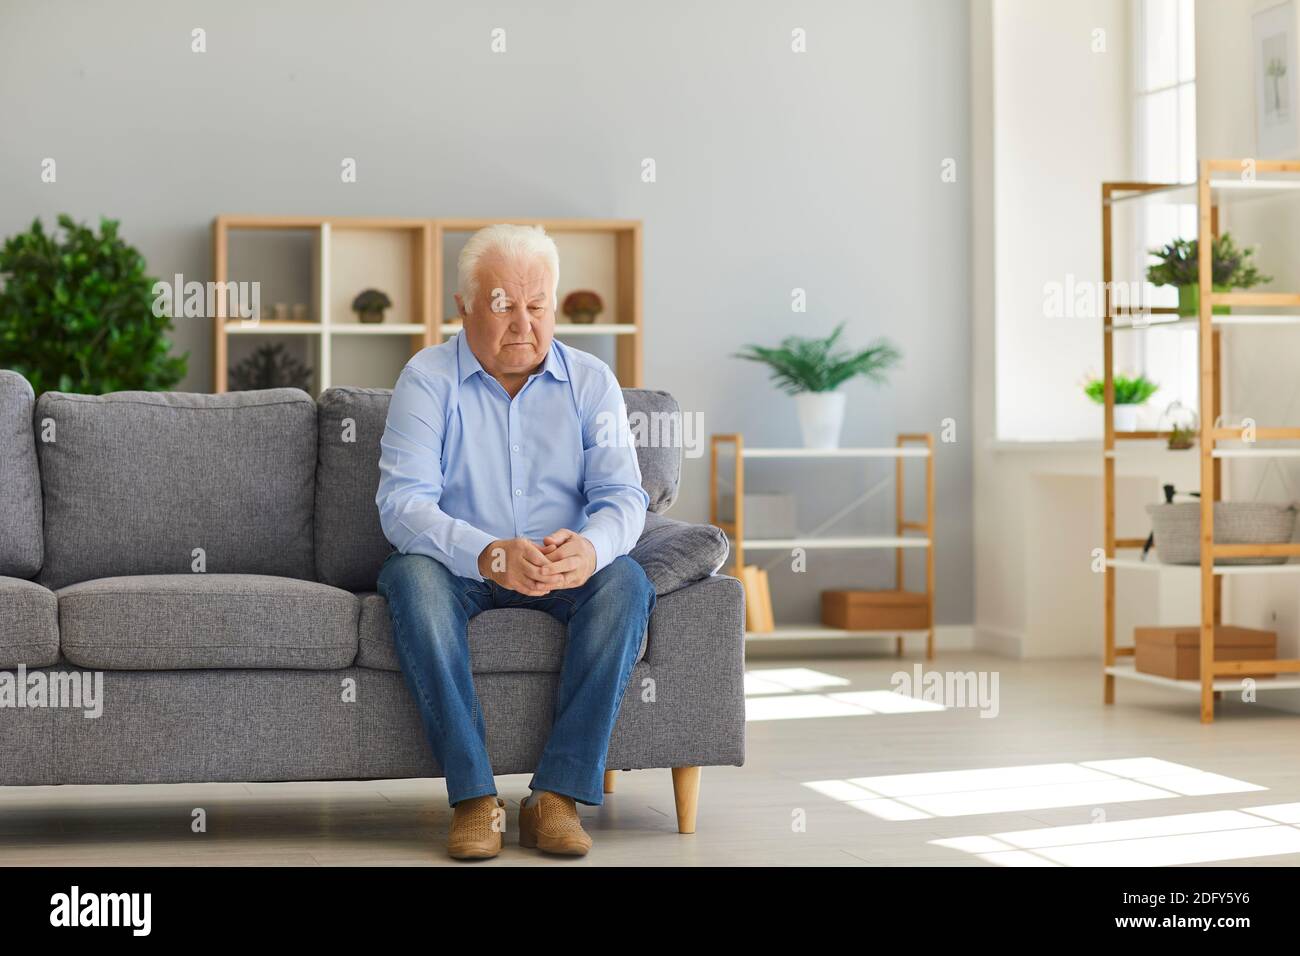 Senior man sitting on sofa at home feeling depressed, lonely and abandoned by his family Stock Photo